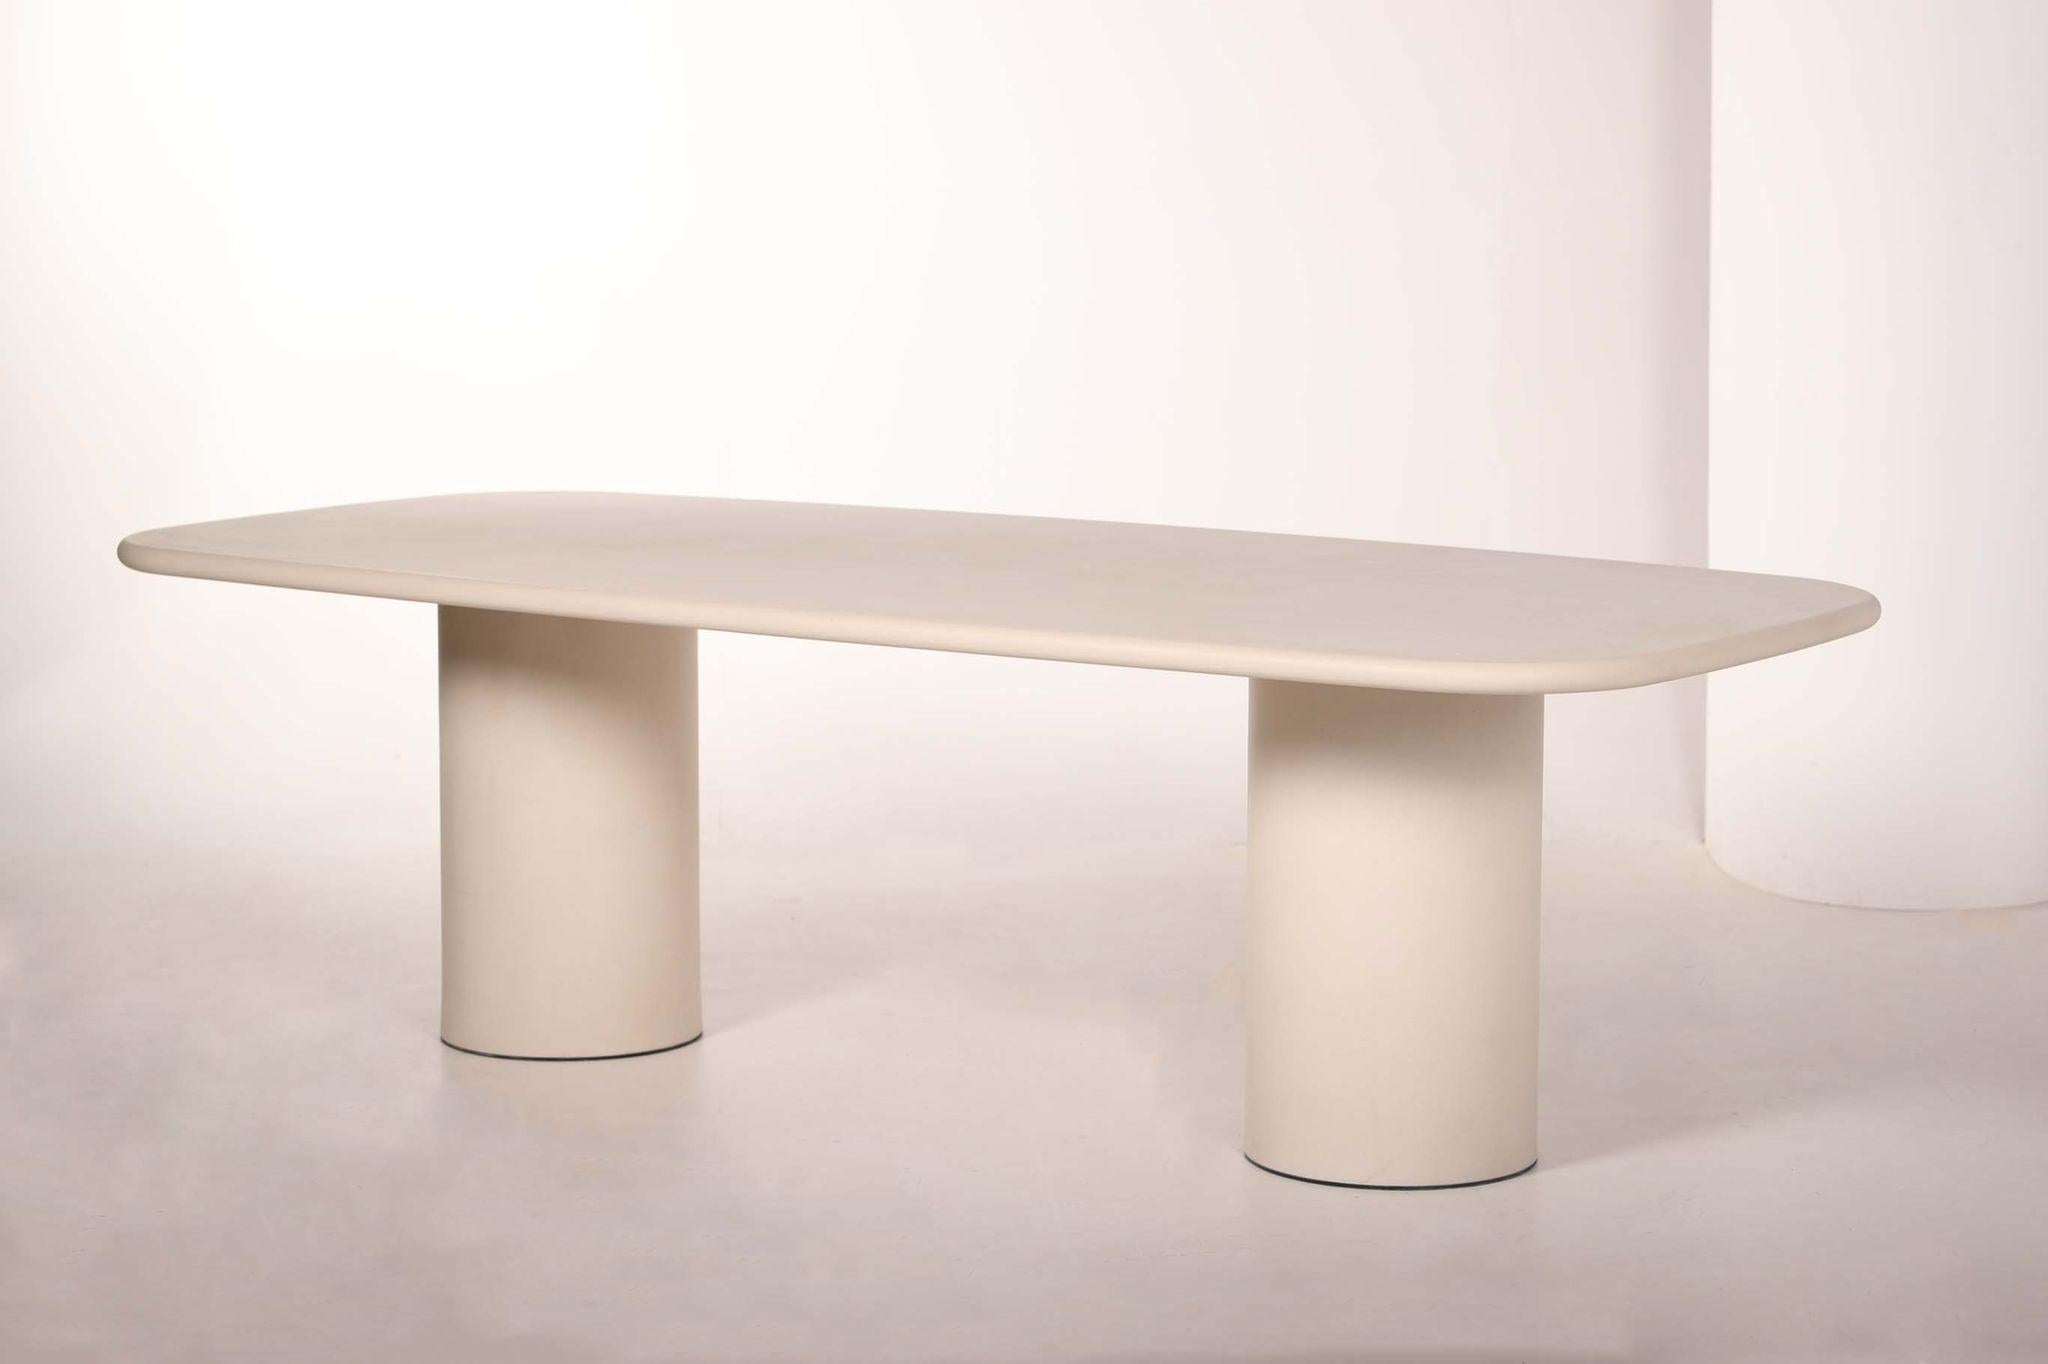 Natural Plaster Hand-Sculpted Outdoor dining table 360 by Philippe Colette
Dimensions: L 360 x W 110 cm
Customized height, please contact us.
10/12 pers.
Materials: Mineral lime plaster.

Our tables are in mineral lime plaster, unlike mortex, they